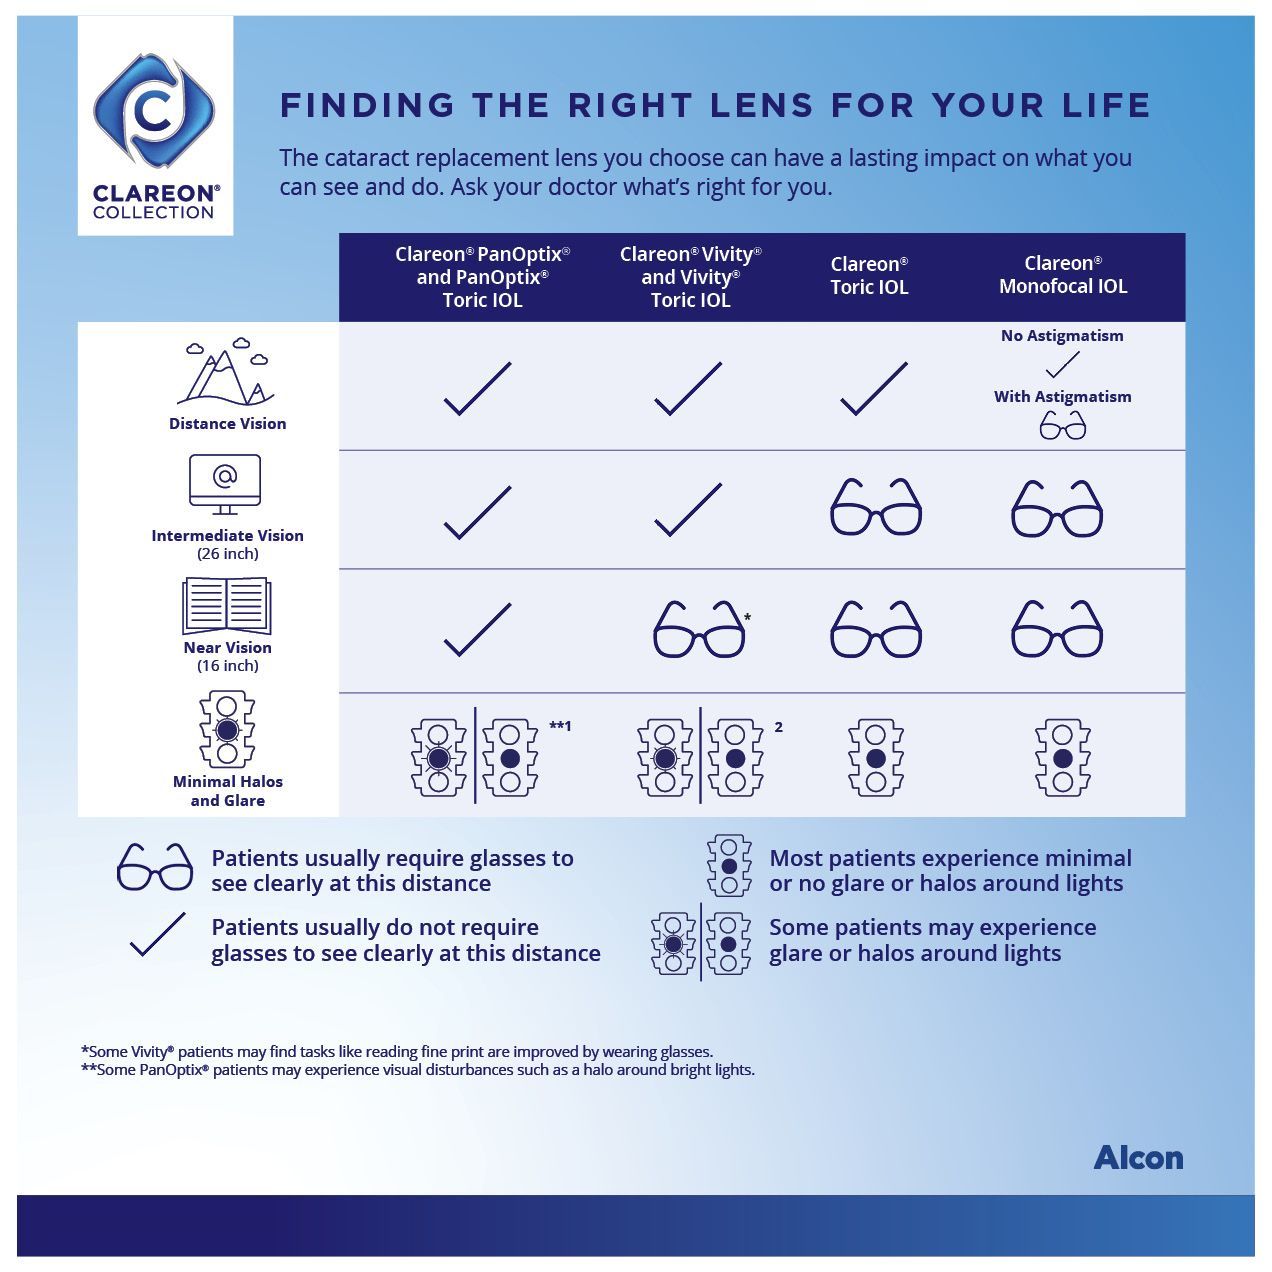 Finding the right lens | Eyecare Associates of Texas, P.A.